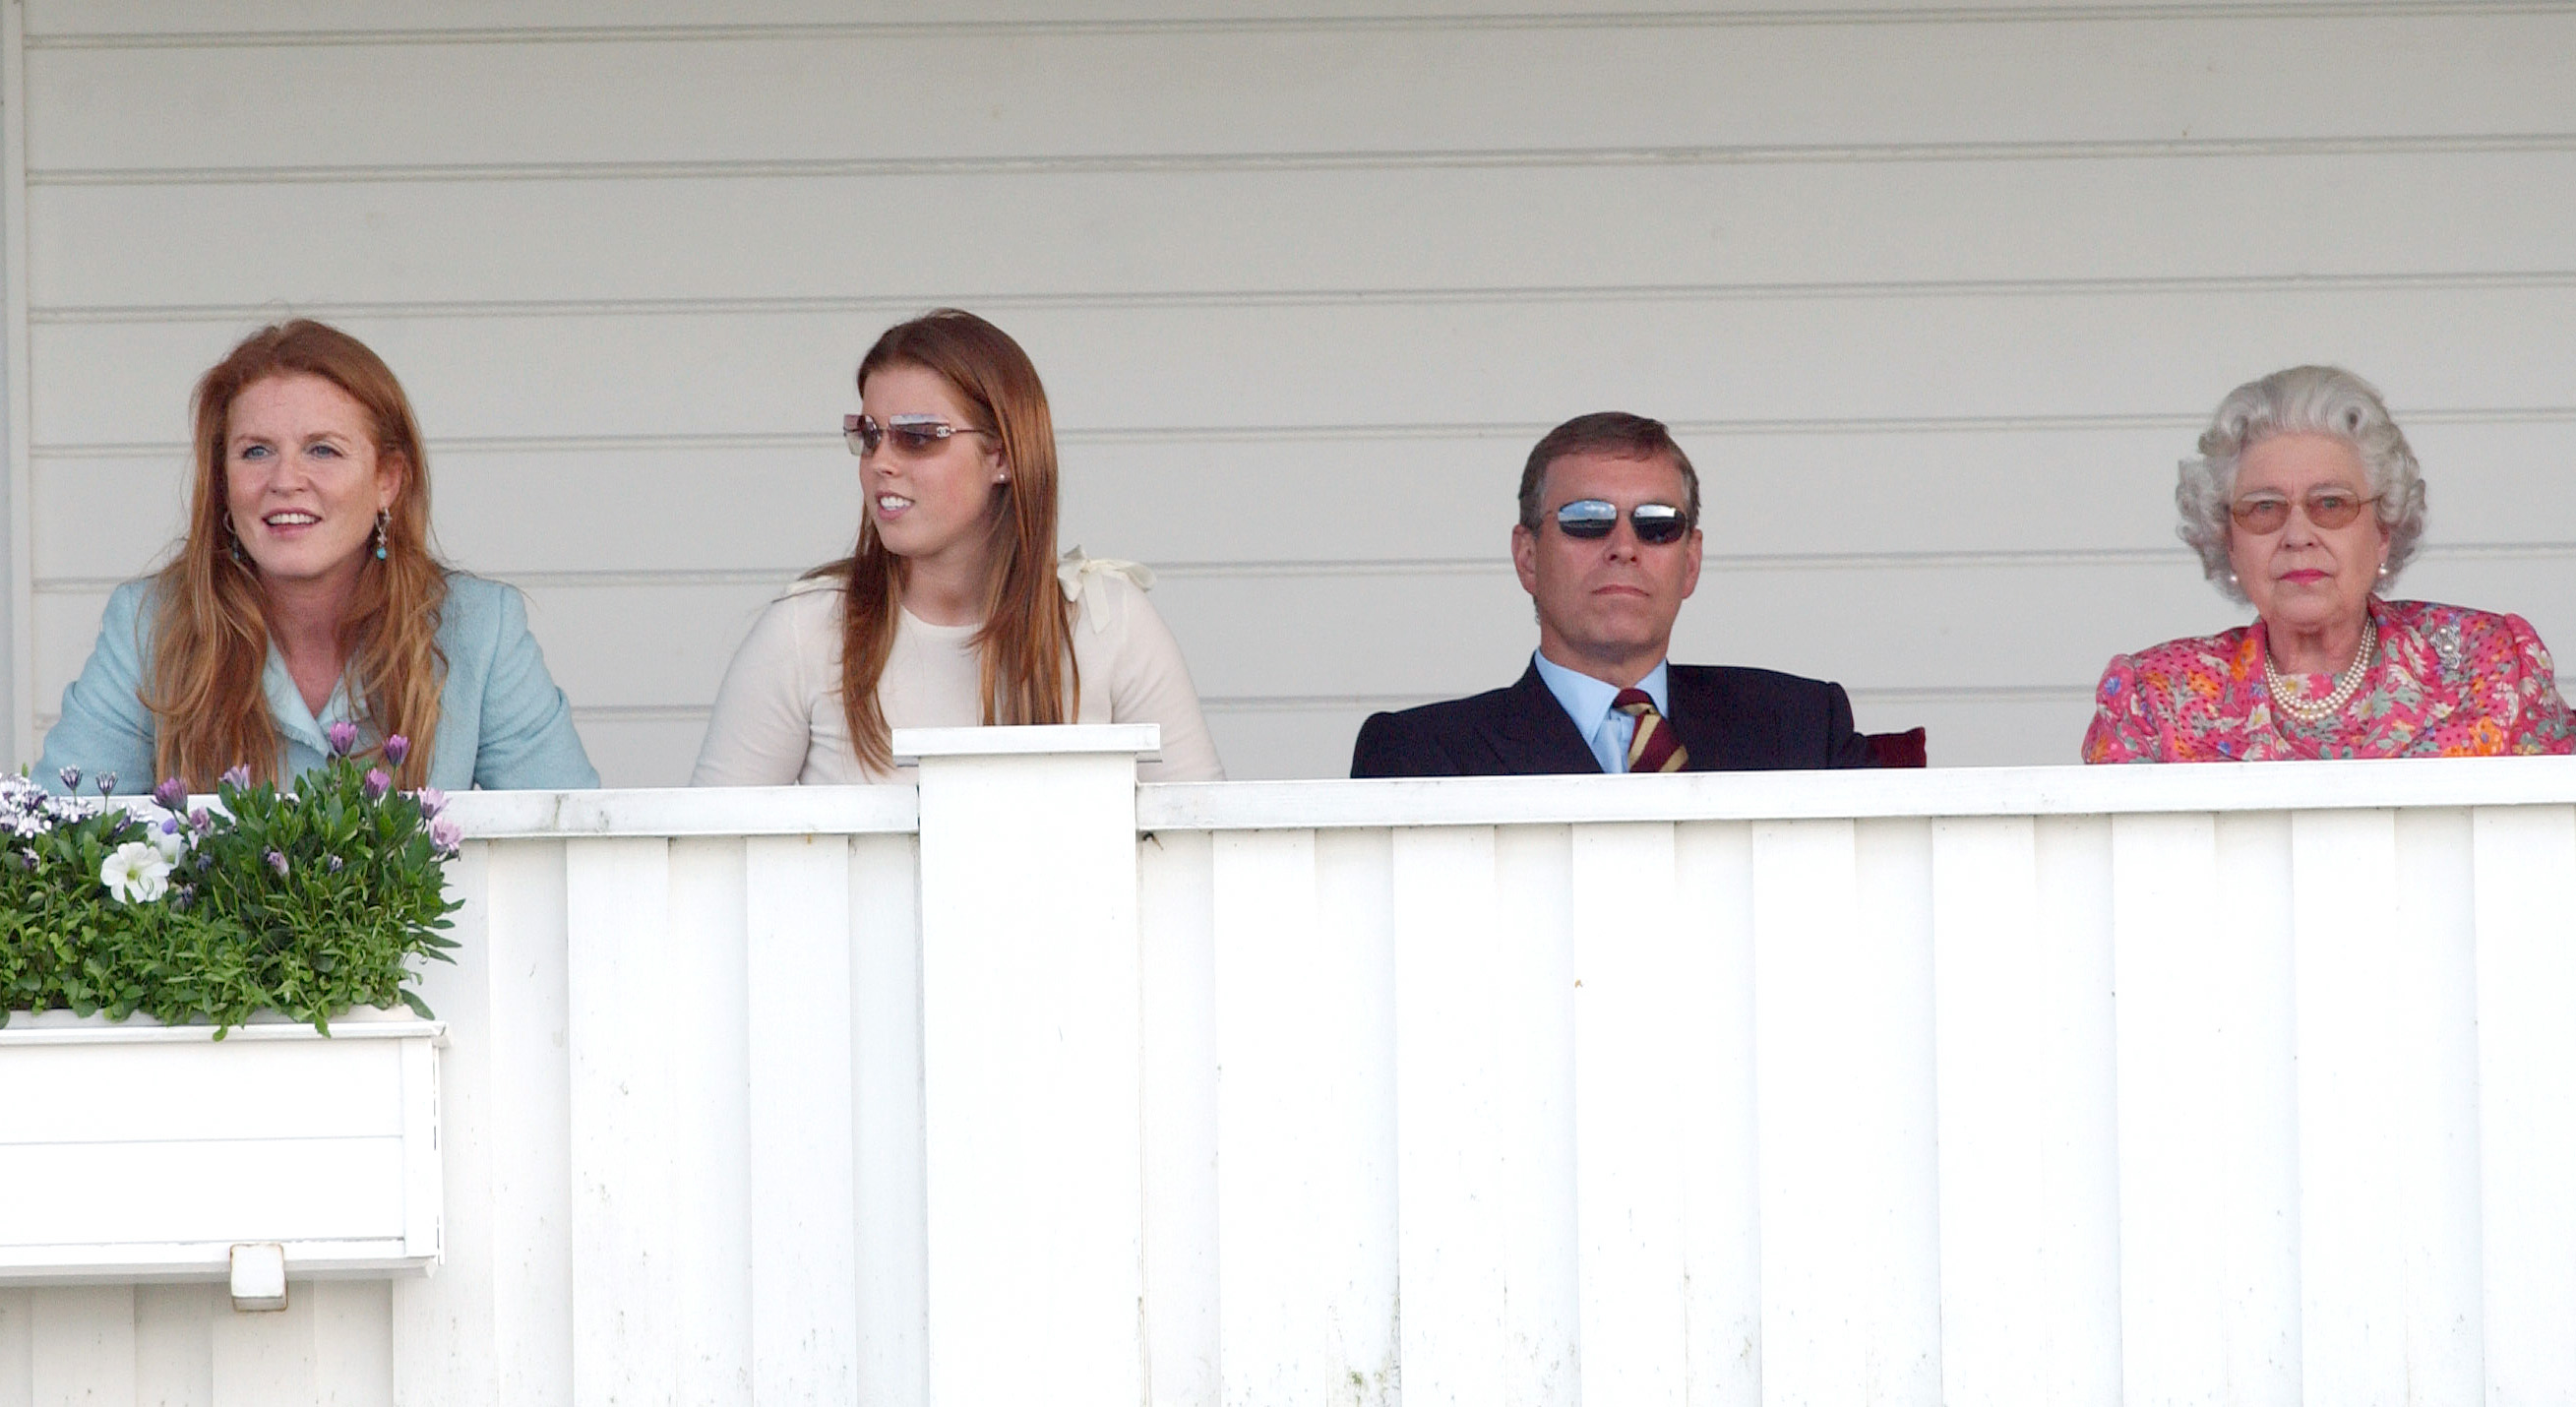 (L to R) Sarah Ferguson, Princess Beatrice, Prince Andrew, and Queen Elizabeth II watching a polo match together